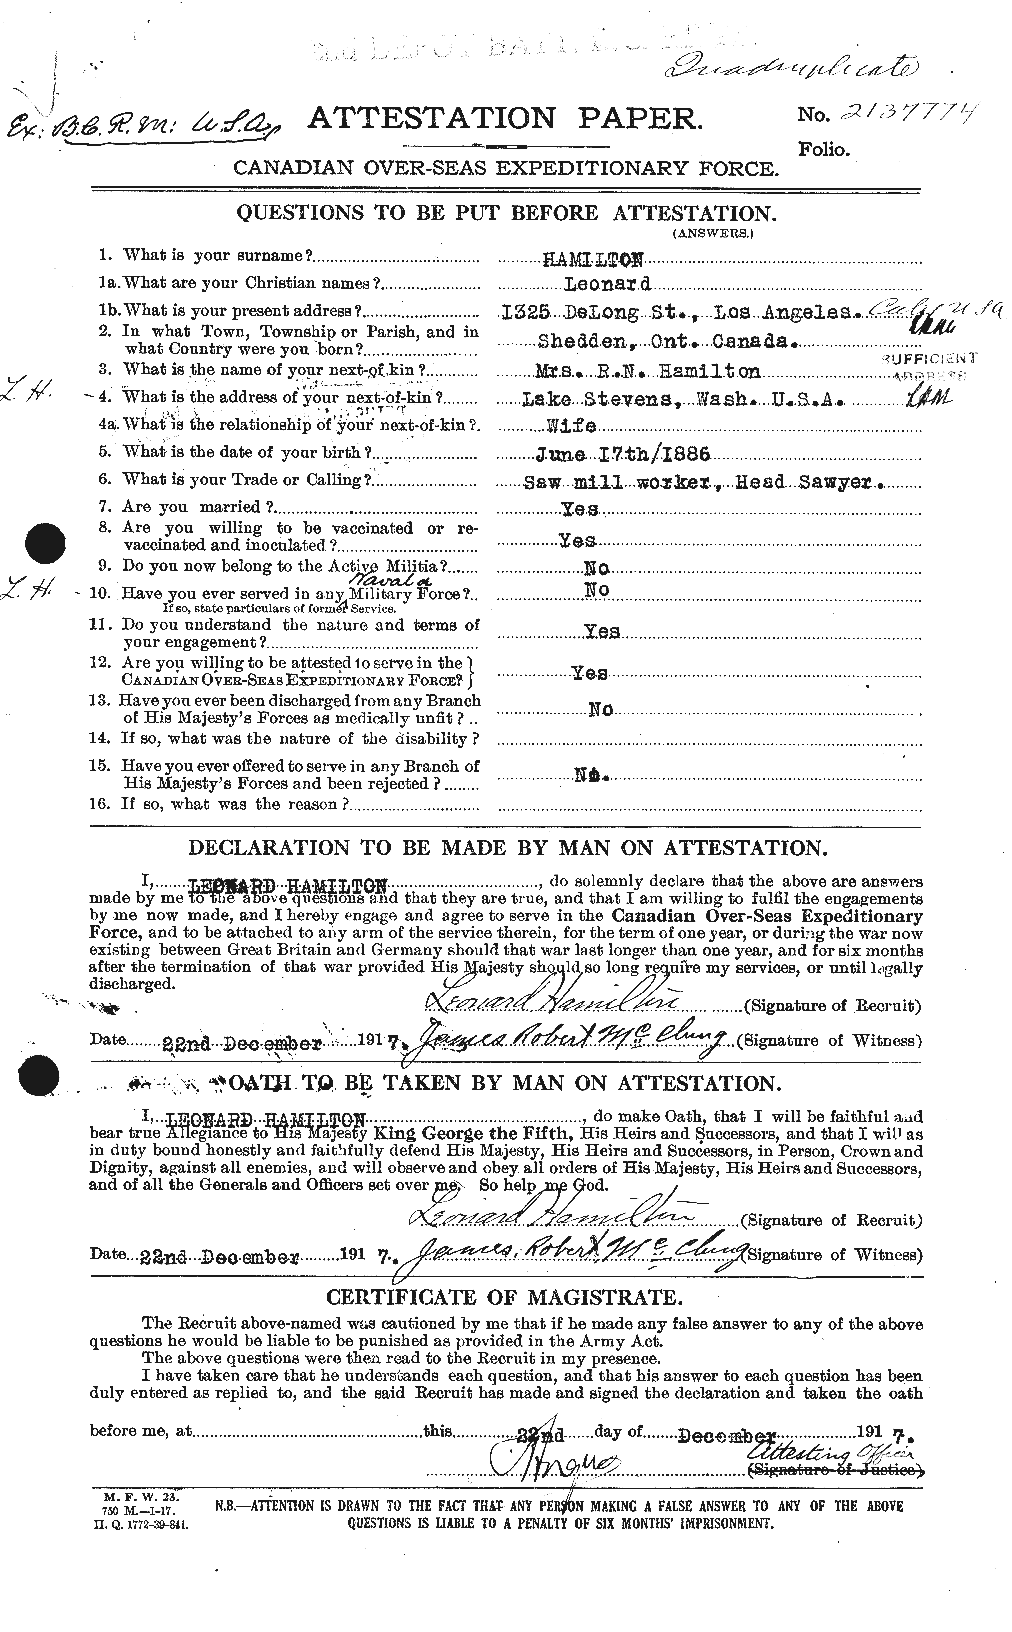 Personnel Records of the First World War - CEF 373162a